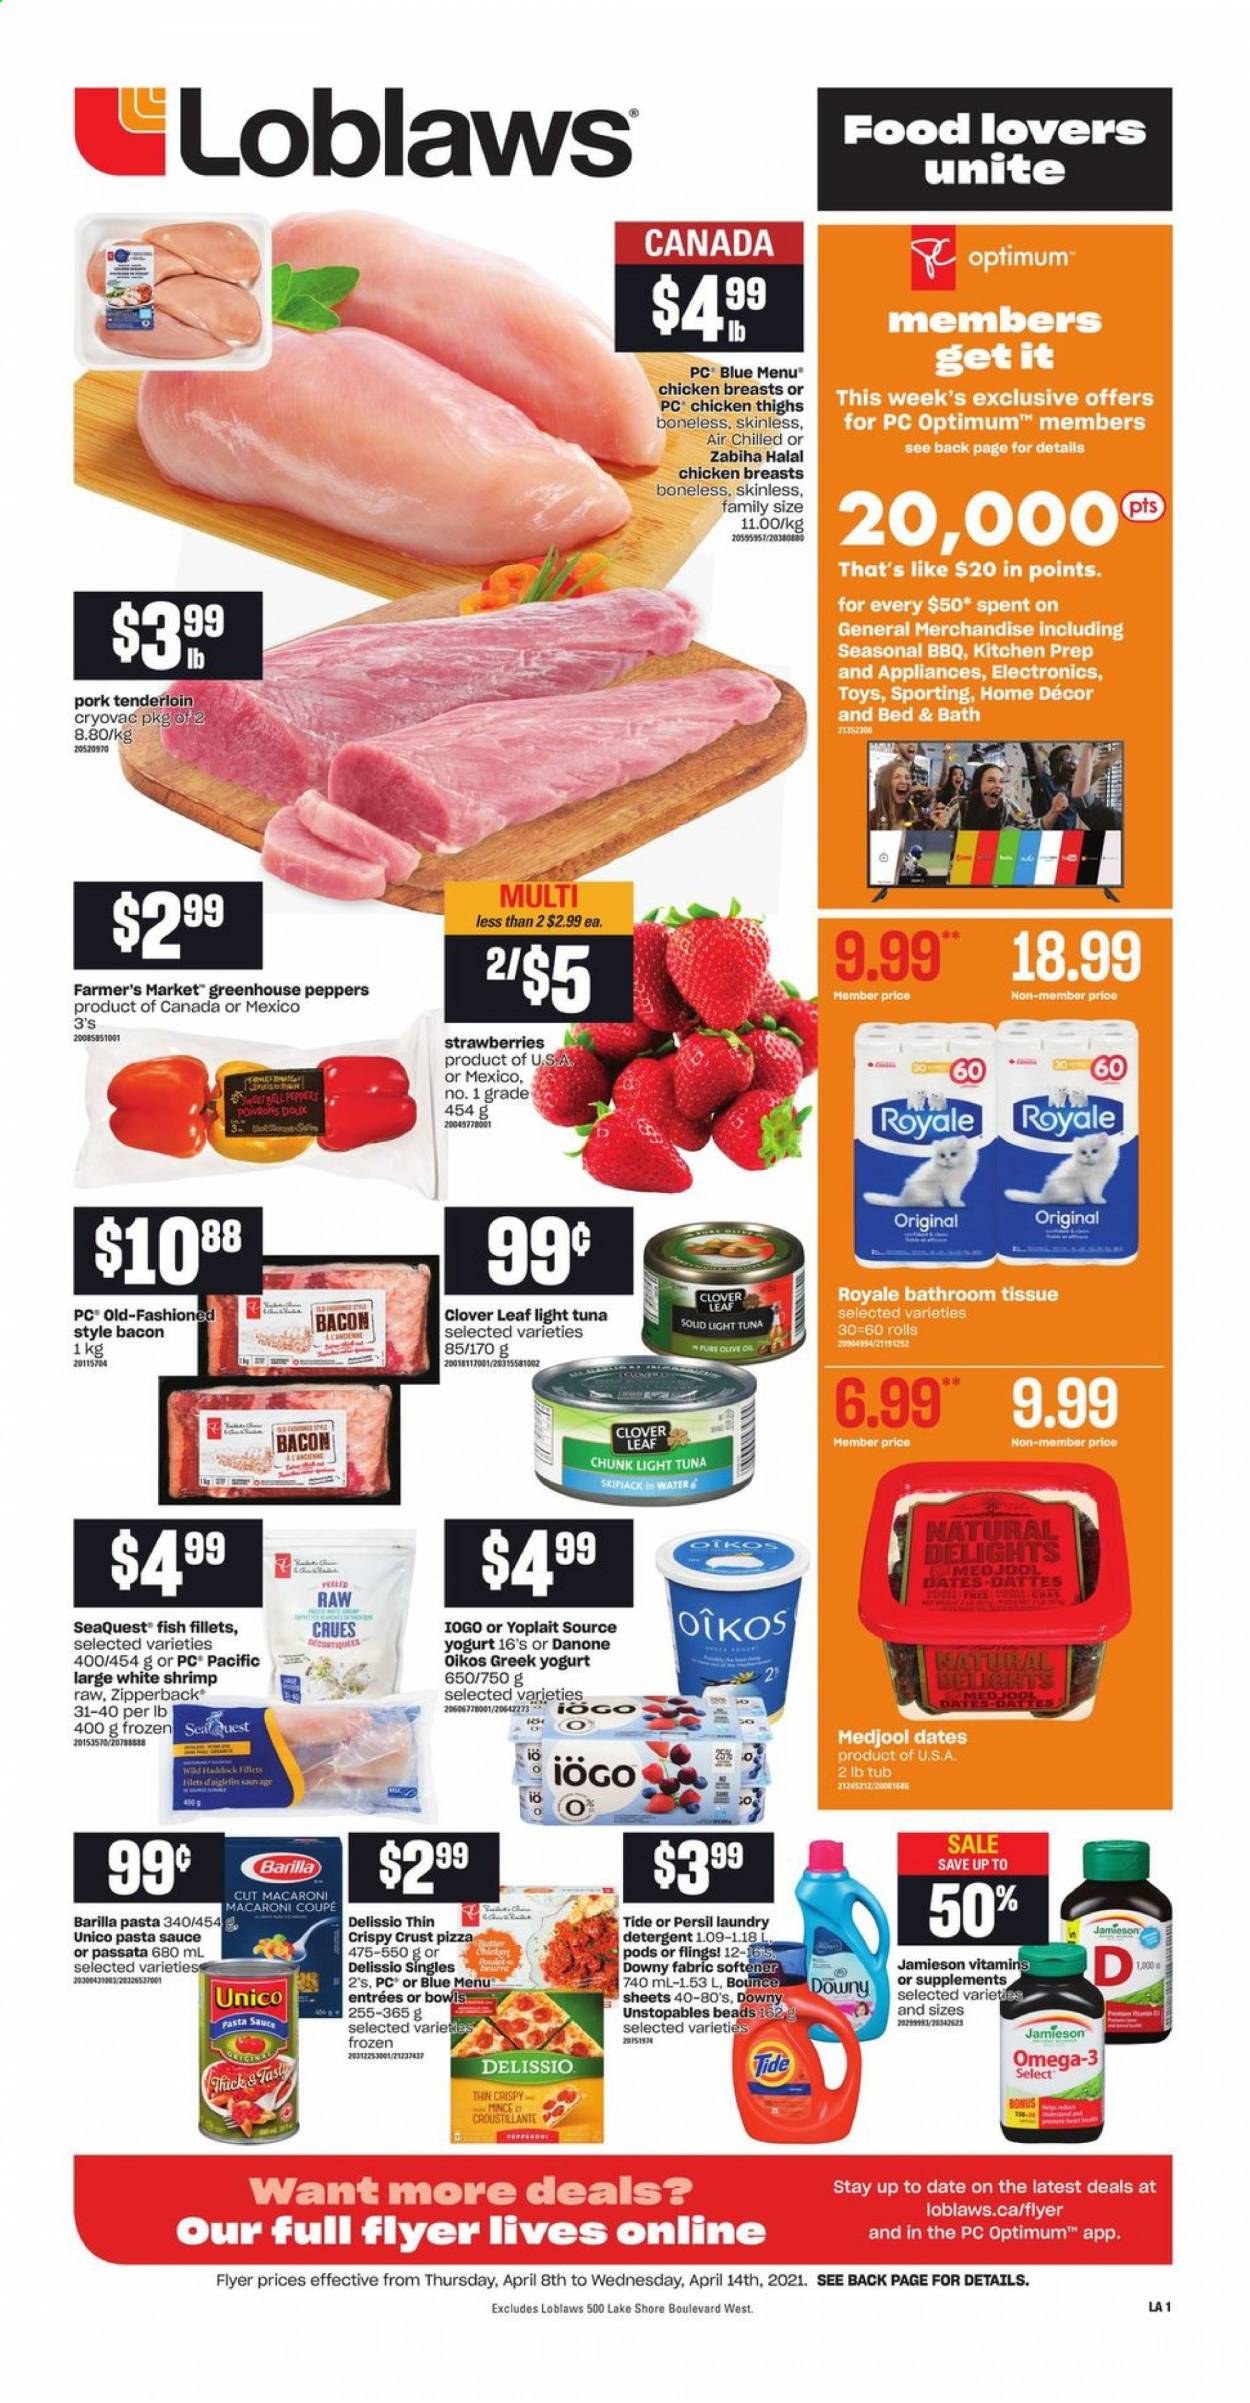 thumbnail - Loblaws Flyer - April 08, 2021 - April 14, 2021 - Sales products - peppers, strawberries, fish fillets, tuna, haddock, fish, shrimps, pizza, pasta sauce, macaroni, Barilla, bacon, greek yoghurt, yoghurt, Clover, Oikos, Yoplait, light tuna, dried dates, chicken breasts, chicken thighs, chicken, pork meat, pork tenderloin, bath tissue, Tide, Unstopables, Persil, fabric softener, laundry detergent, Bounce, Downy Laundry, Optimum, Omega-3, Danone. Page 1.